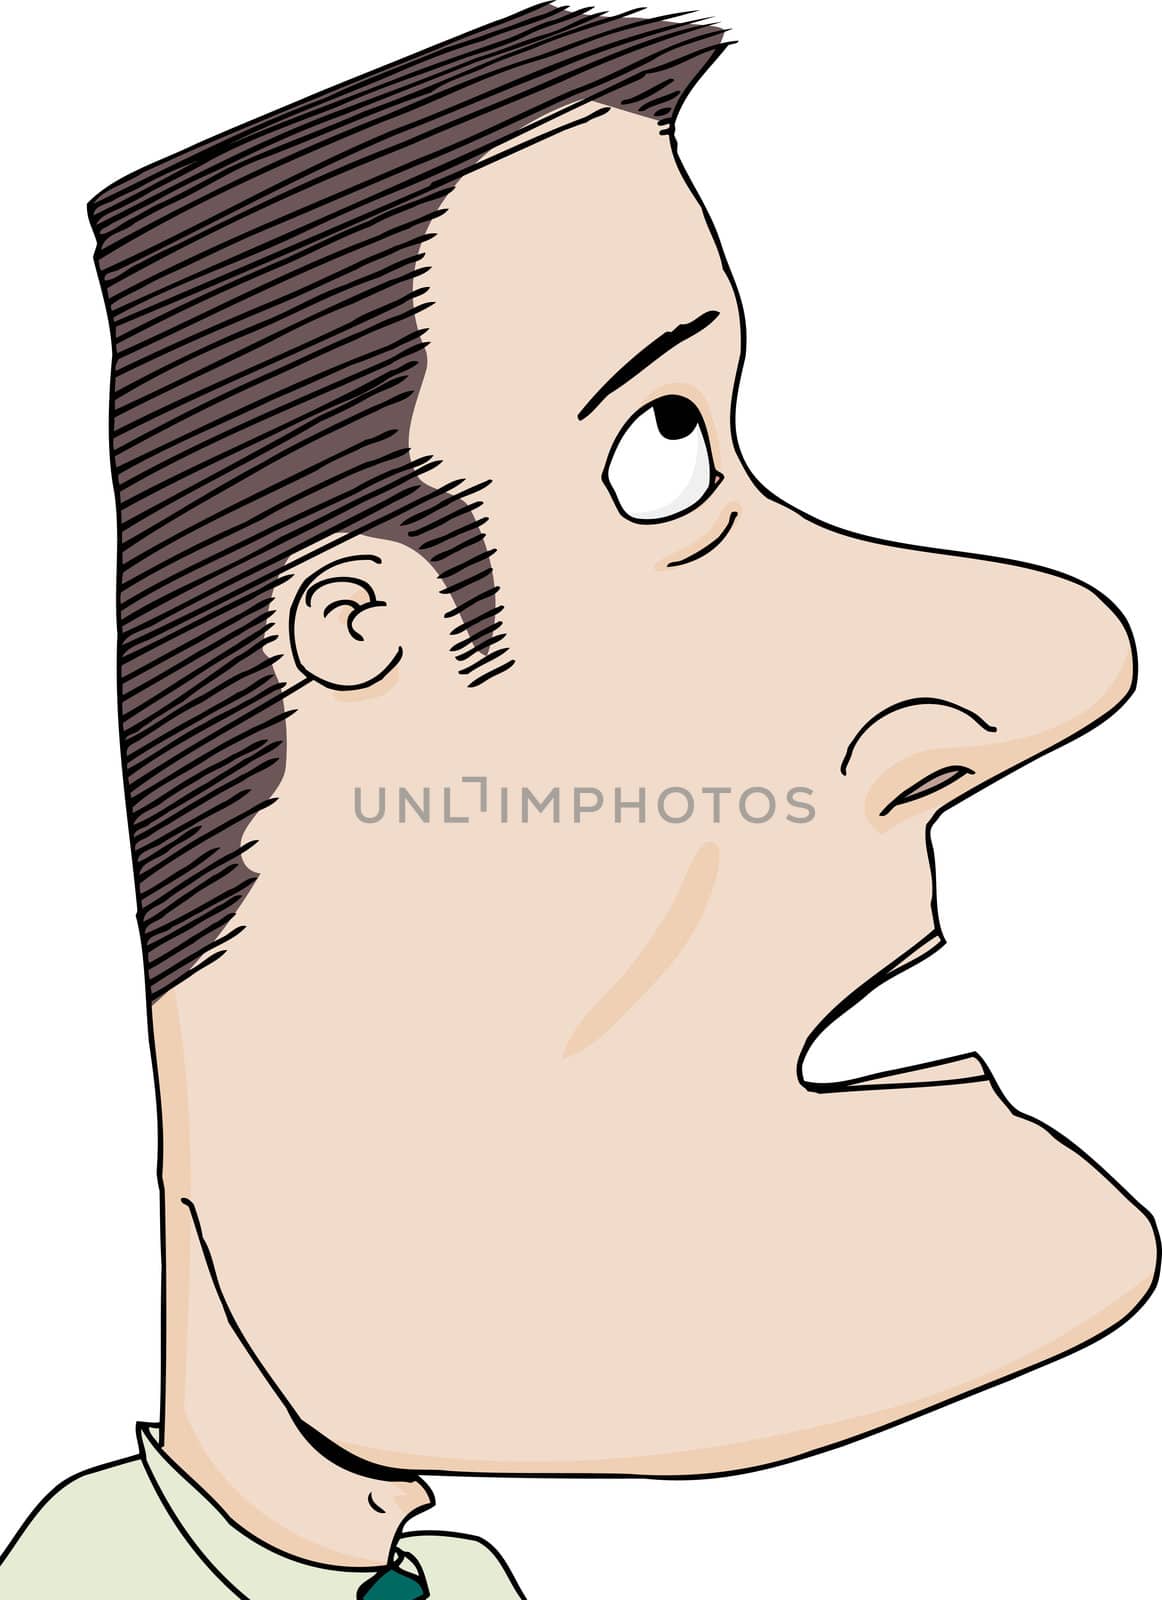 Amazed European man with crew cut looking up